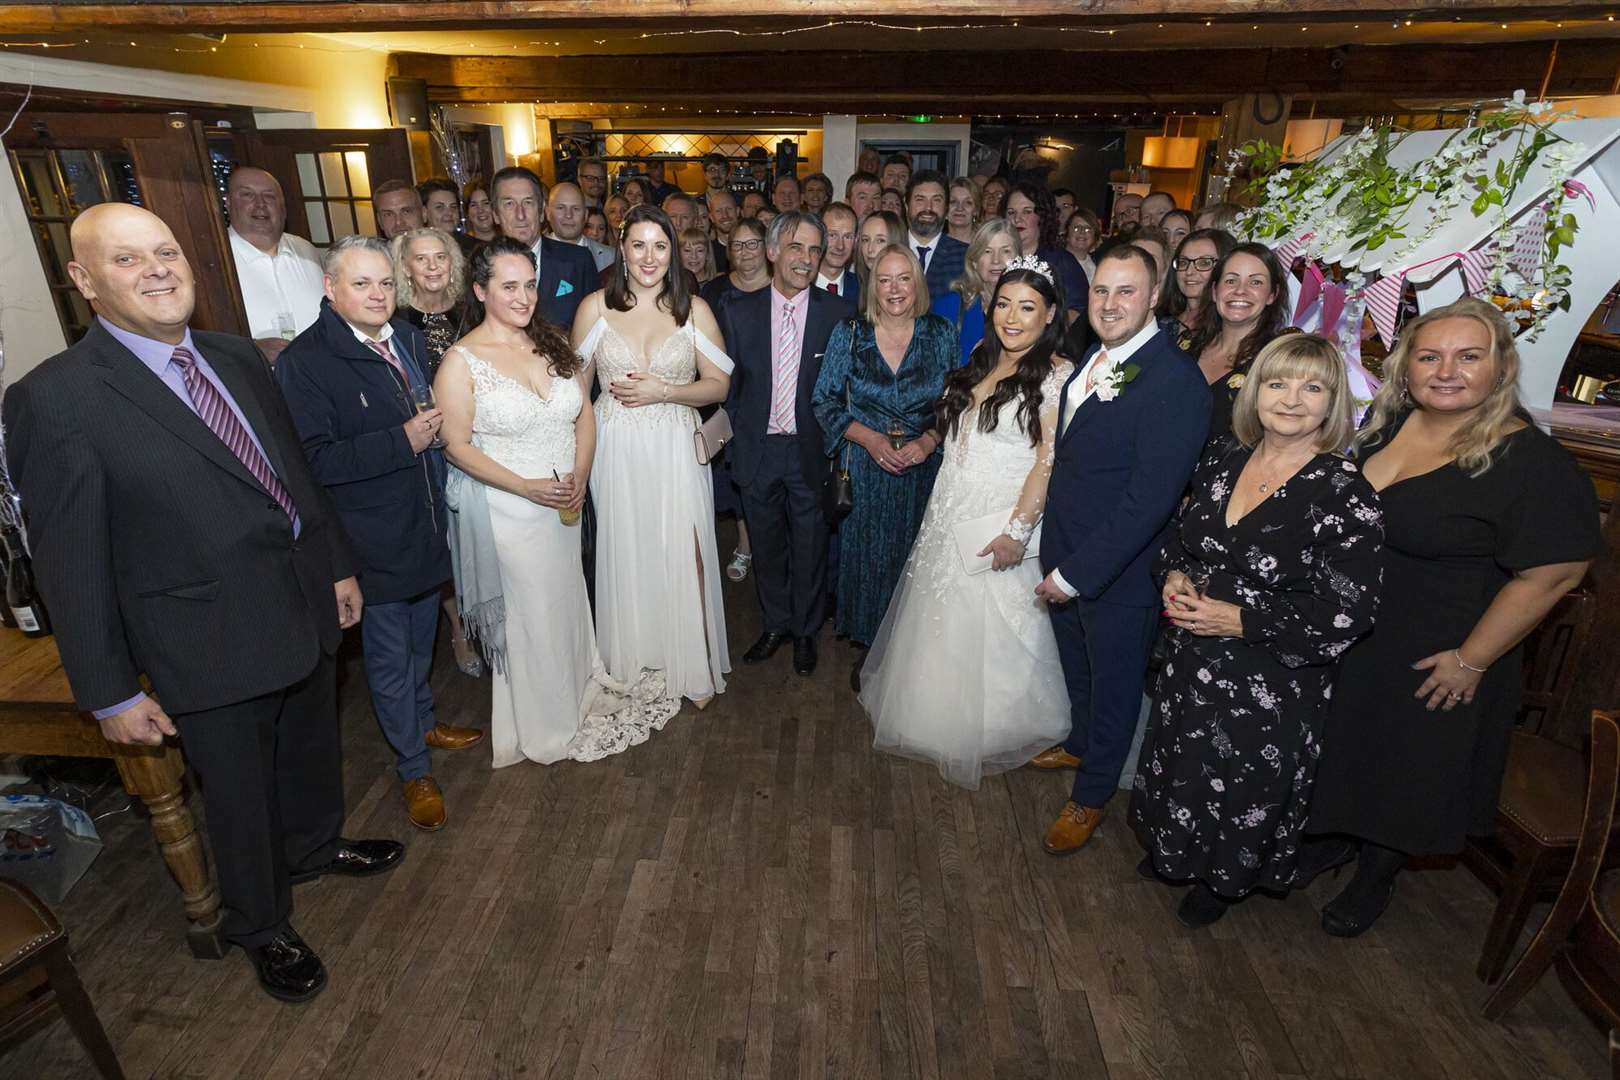 Janet and Philippe Sorak were joined by 30 couples who married at their pub in Tunbridge Wells, to celebrate 30 years as managers. Picture: Shepherd Neame